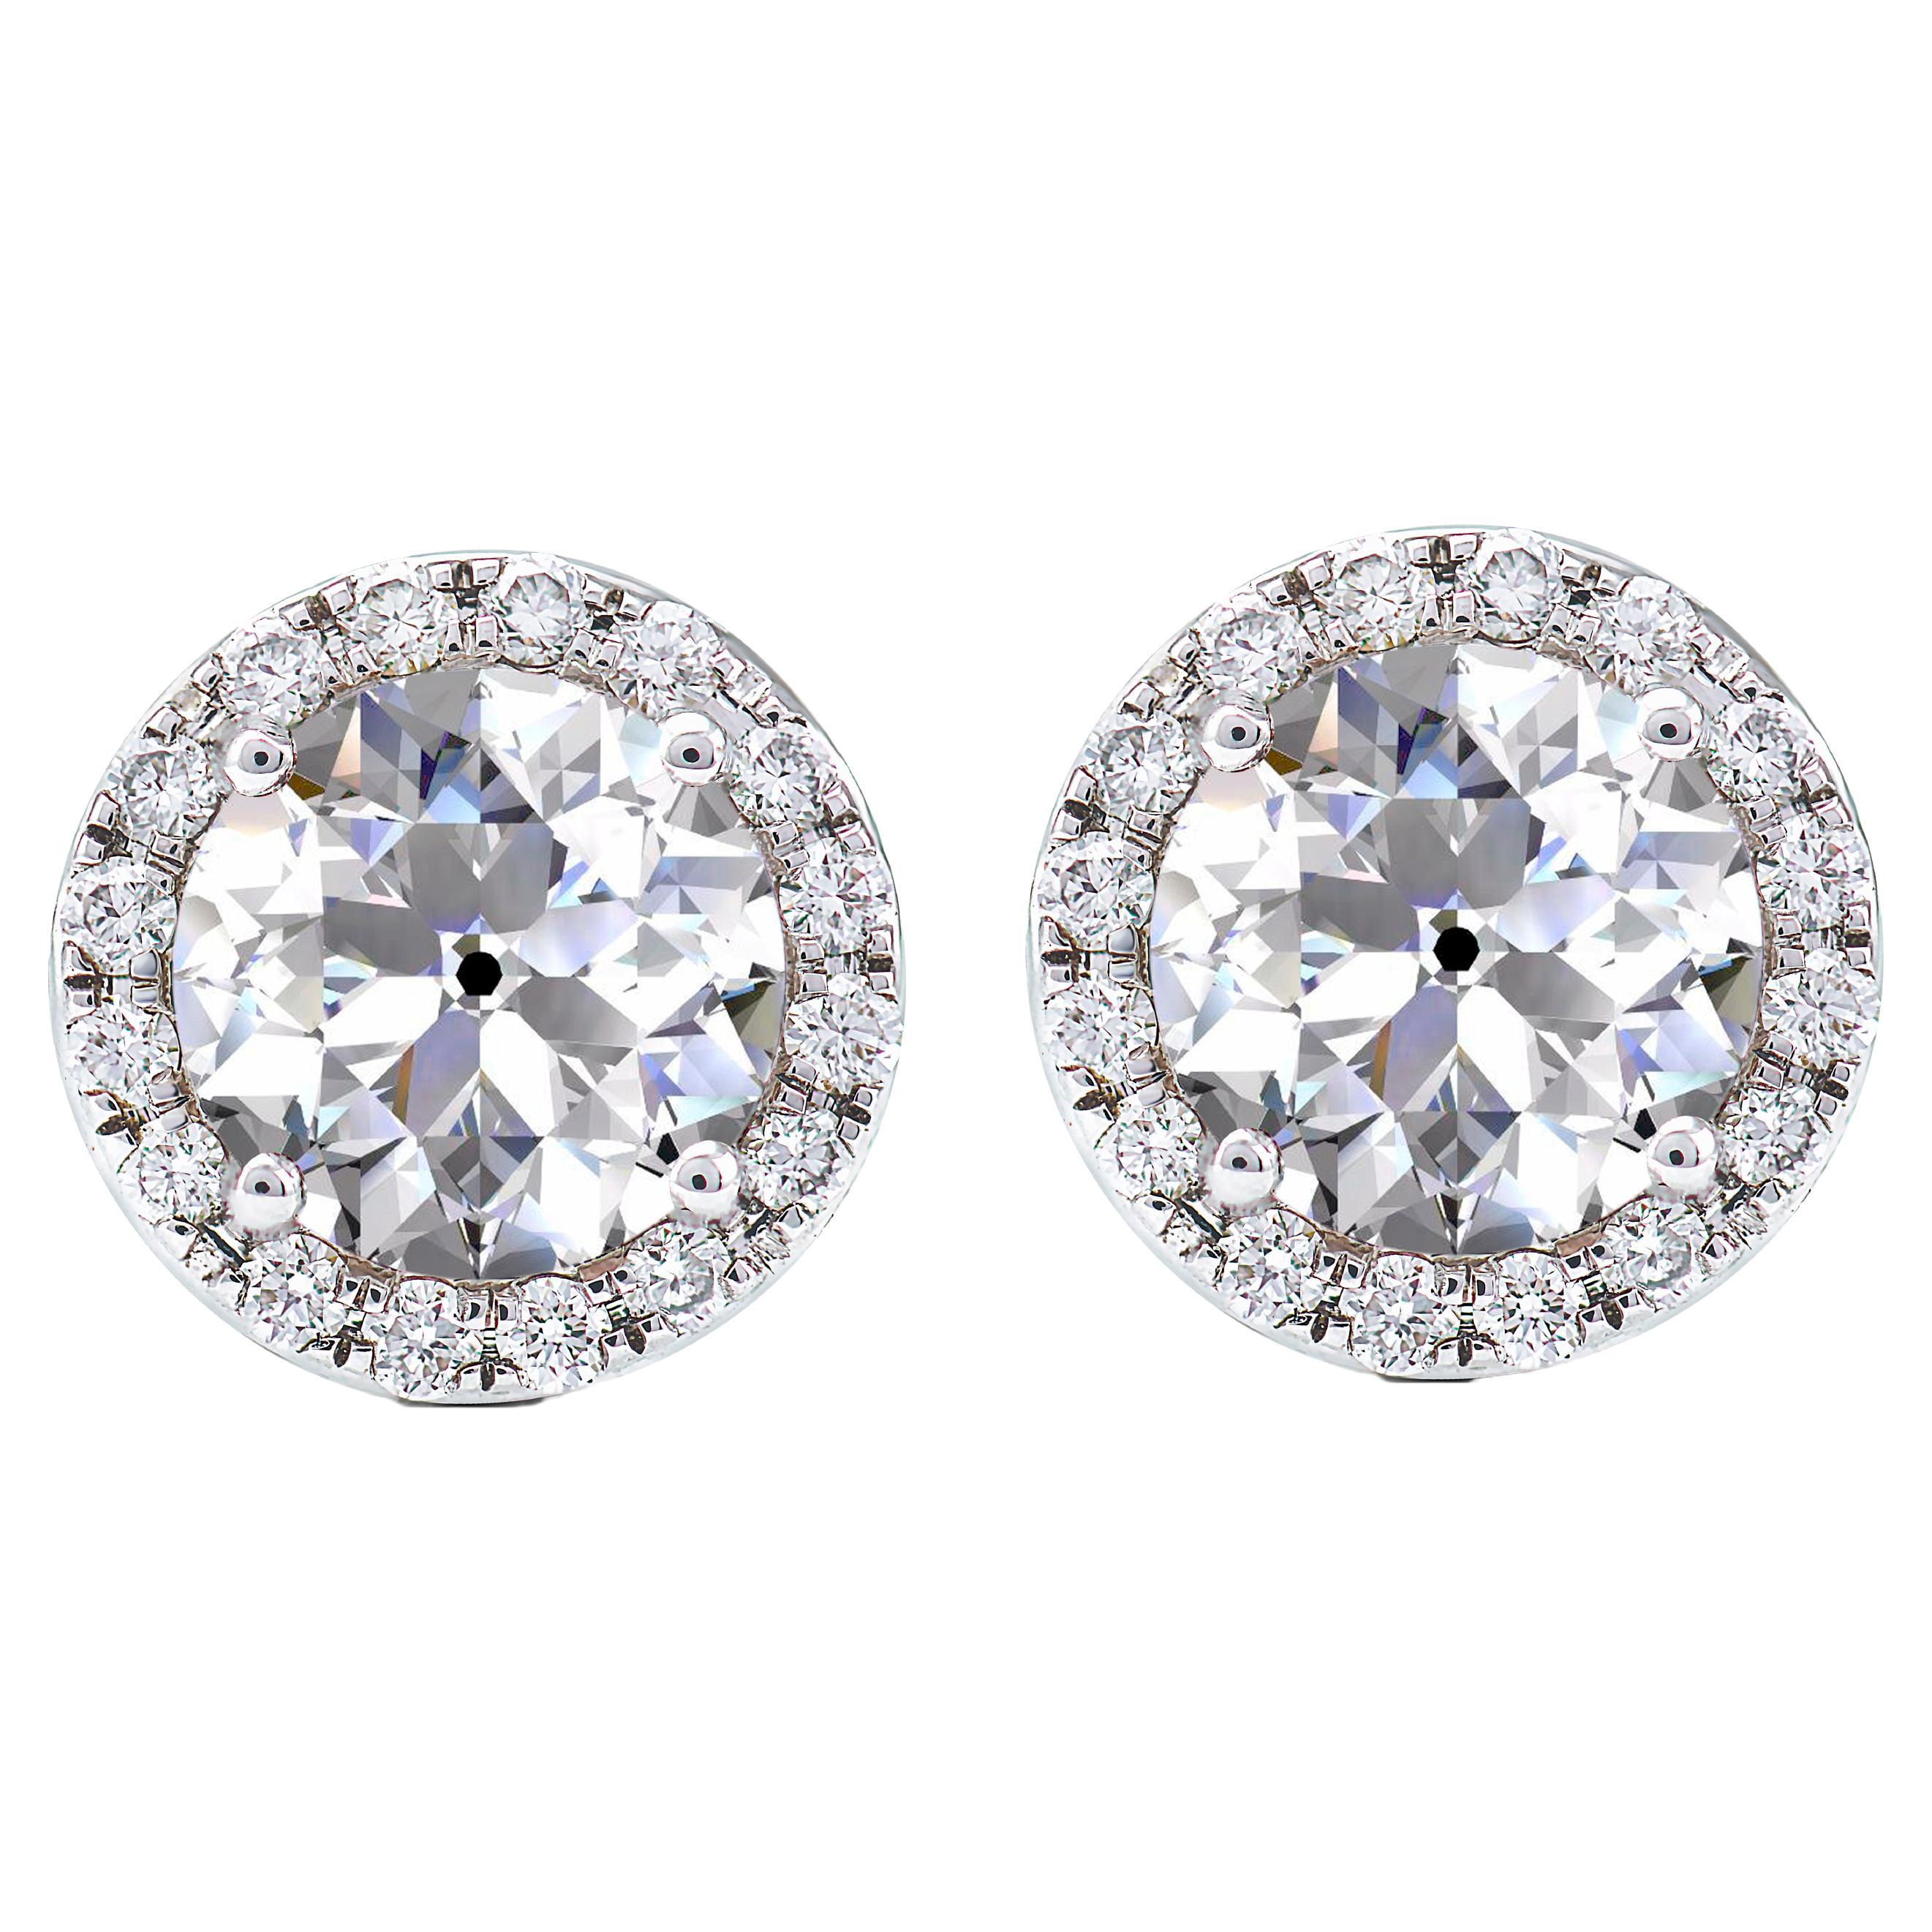 18k Gold 1.38 ct Old Mine Cut Diamond Halo Earrings Studs Contemporary Settings For Sale